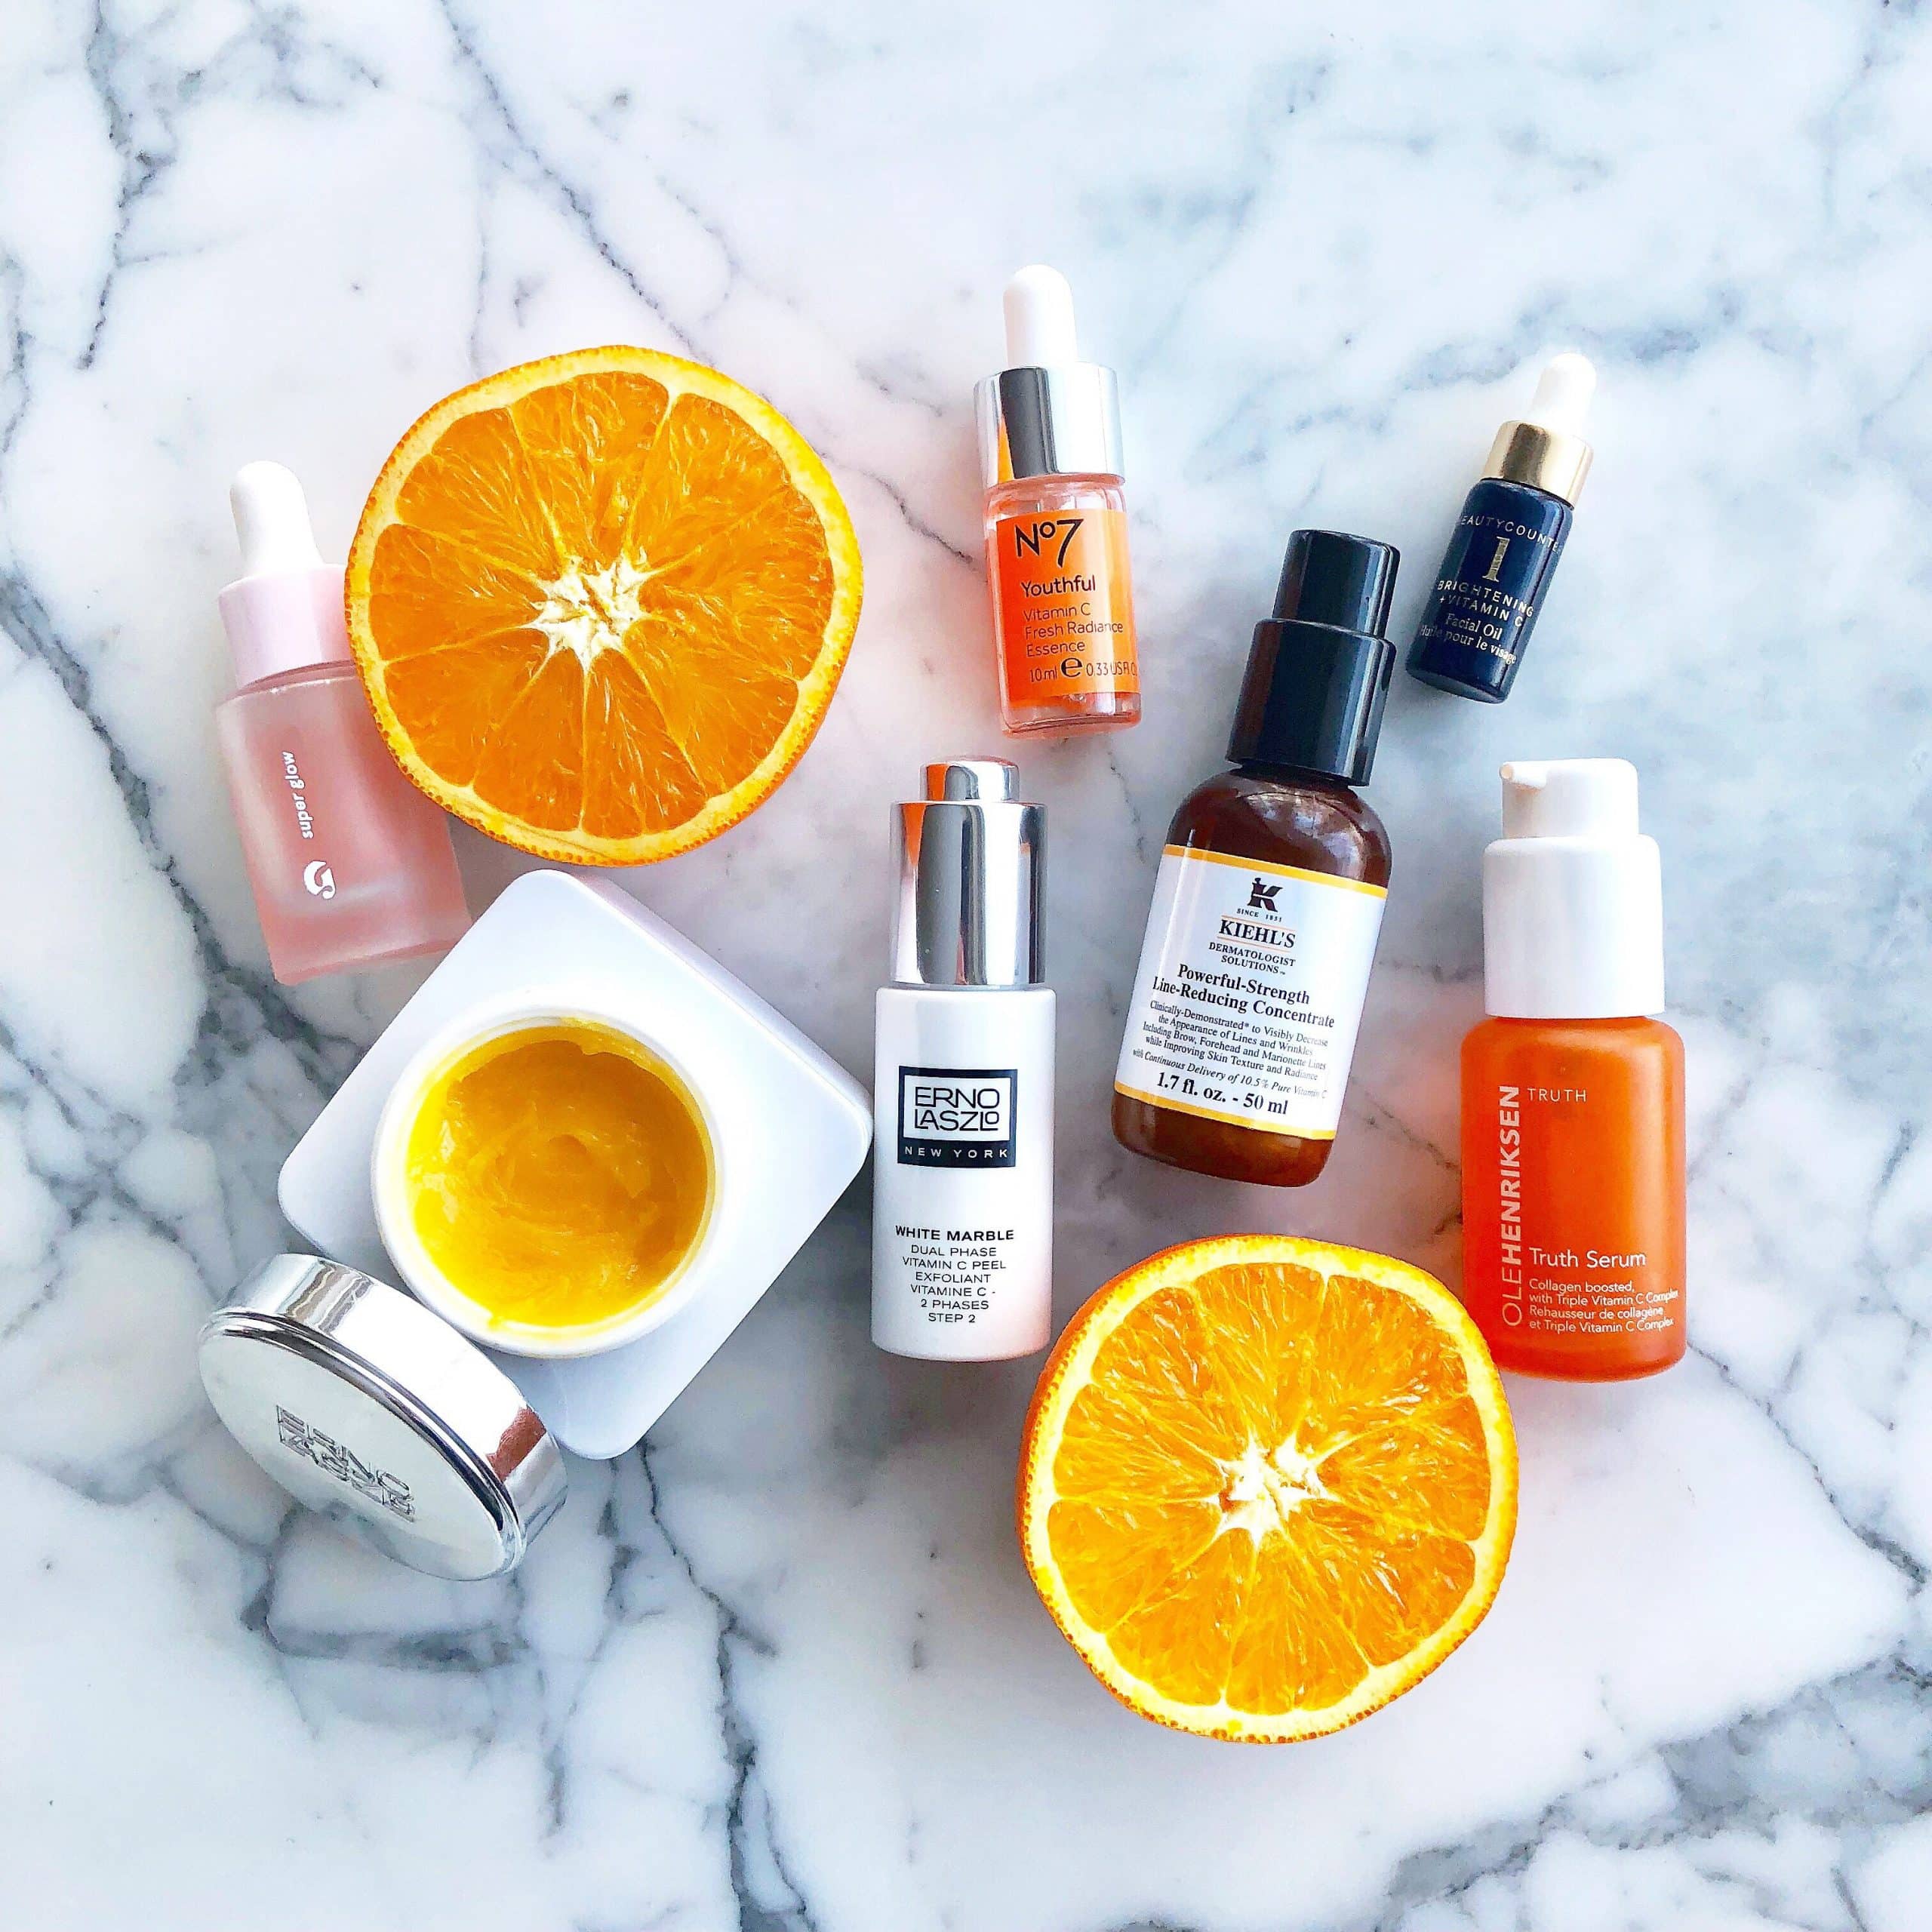 Beauty Product Review: Vitamin C Serums